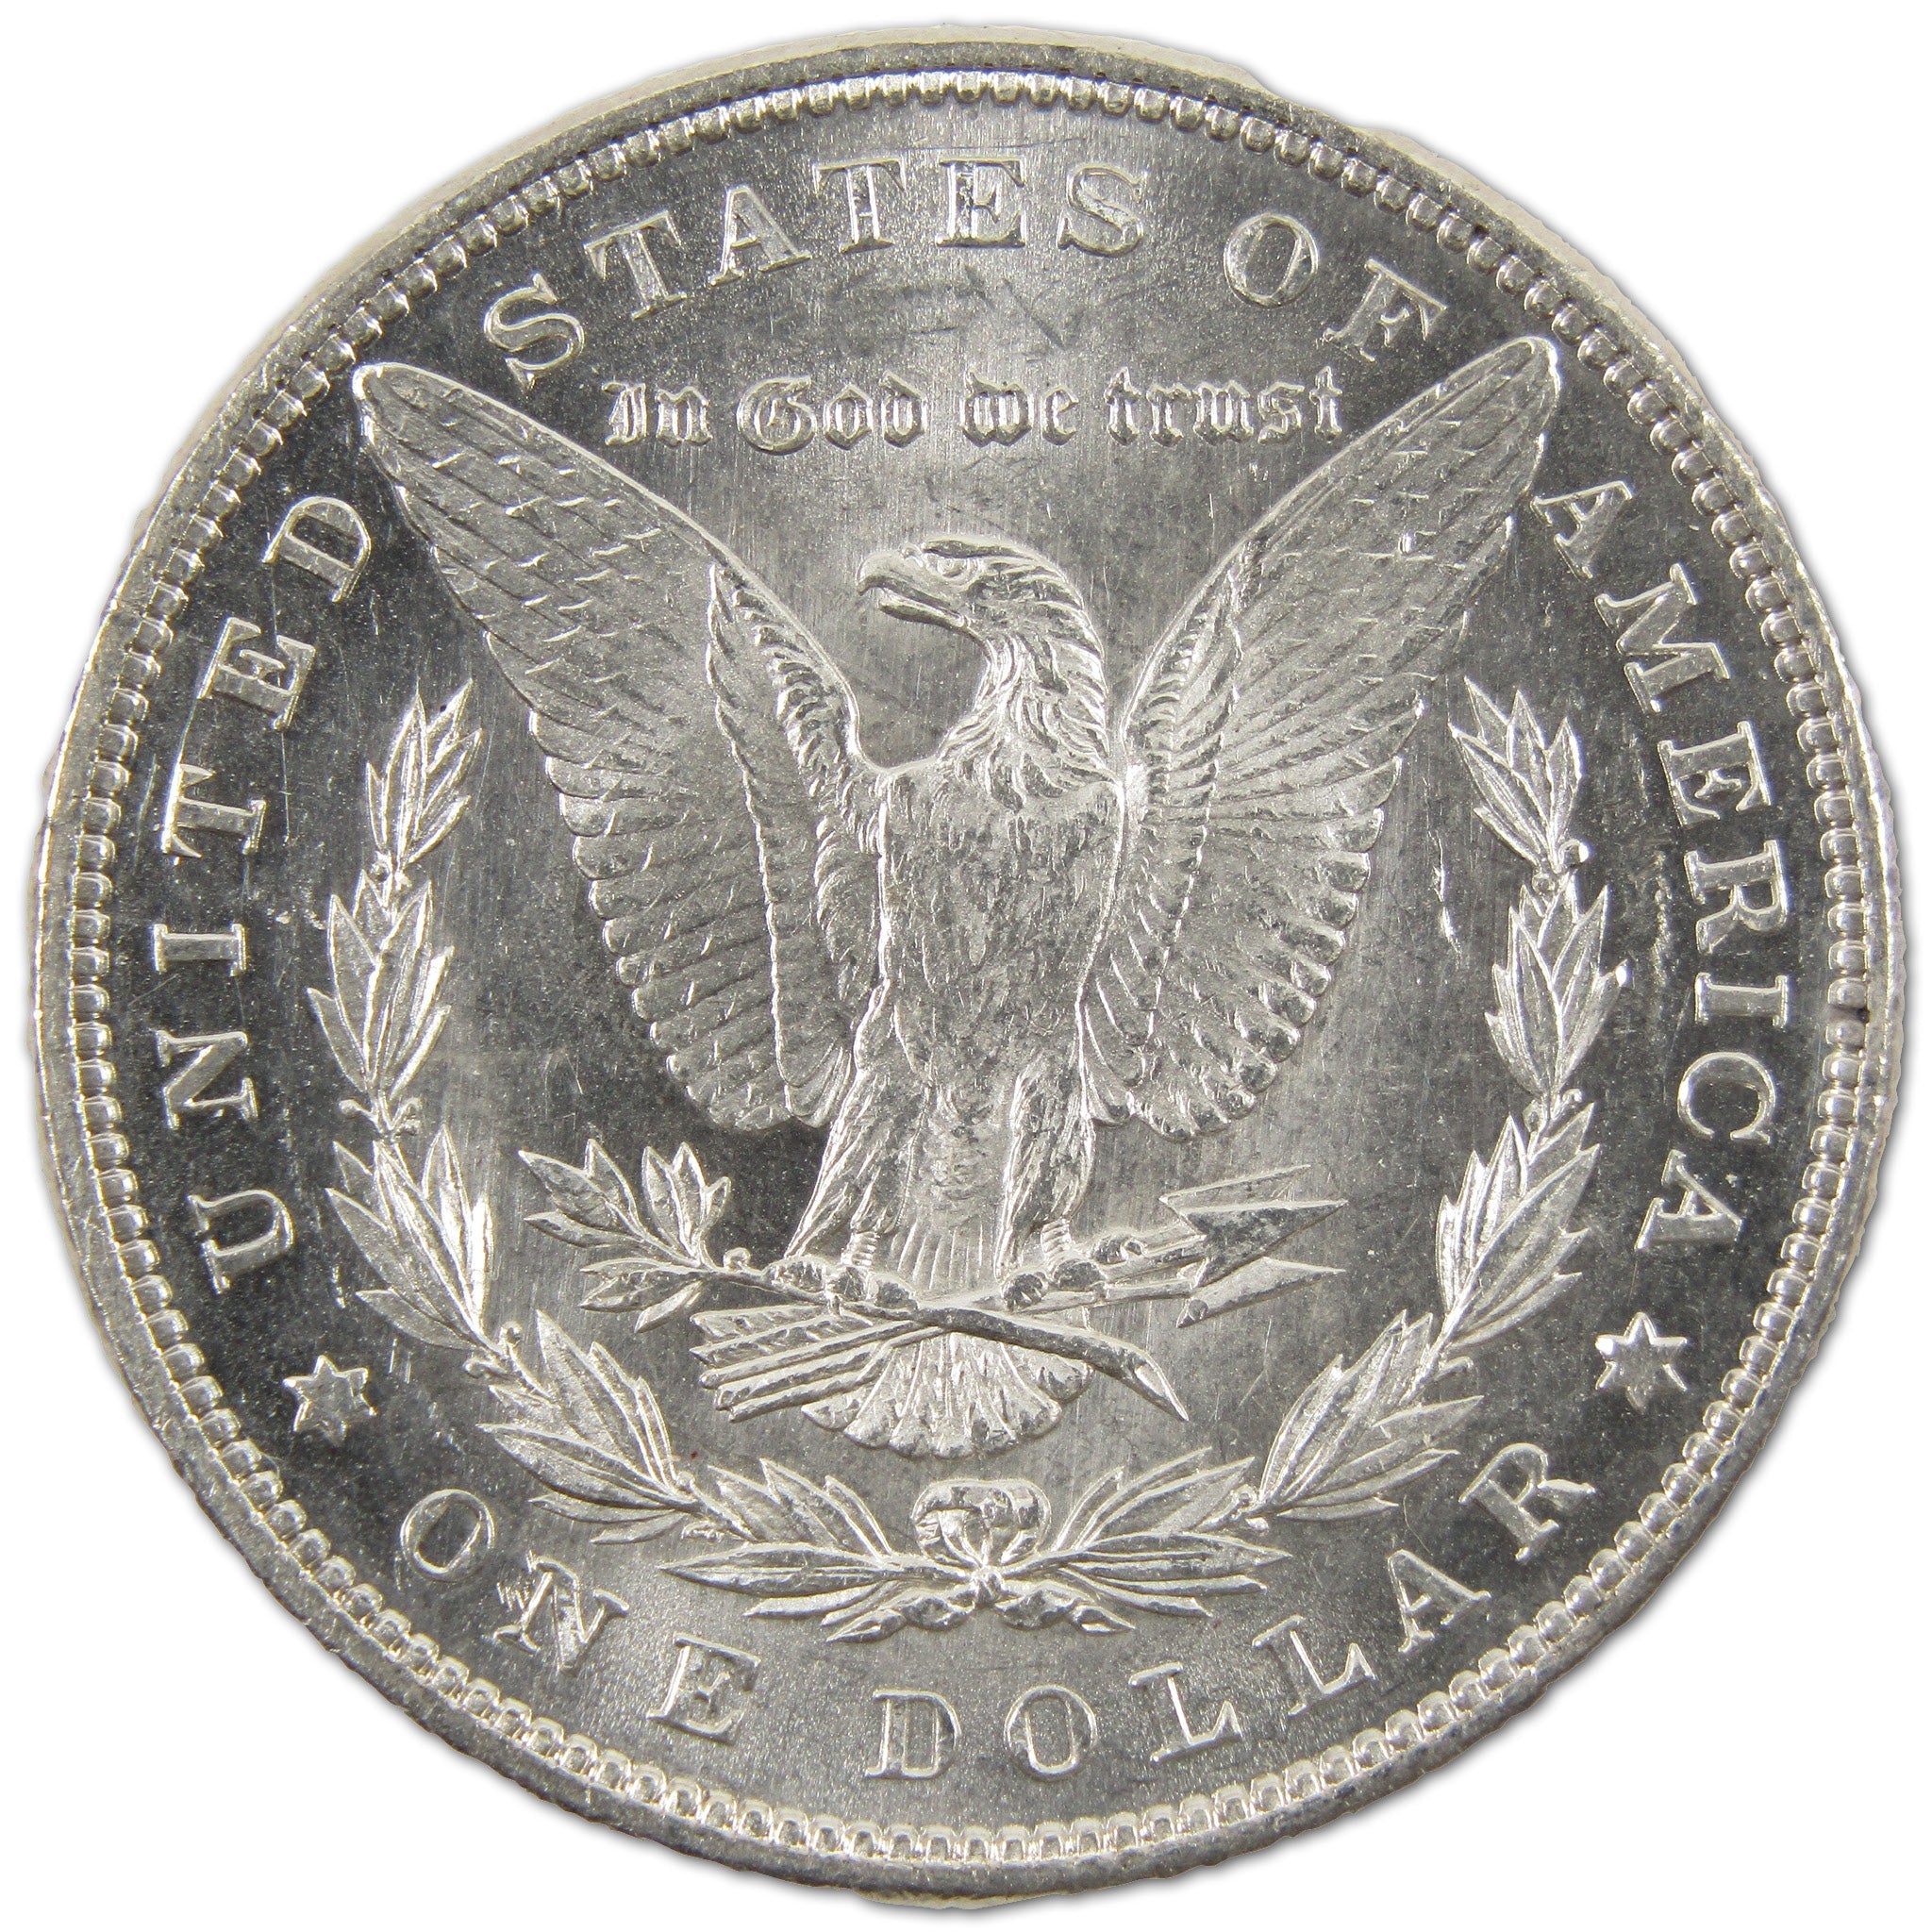 1896 Morgan Dollar BU Uncirculated Silver $1 Proof-Like SKU:I10871 - Morgan coin - Morgan silver dollar - Morgan silver dollar for sale - Profile Coins &amp; Collectibles